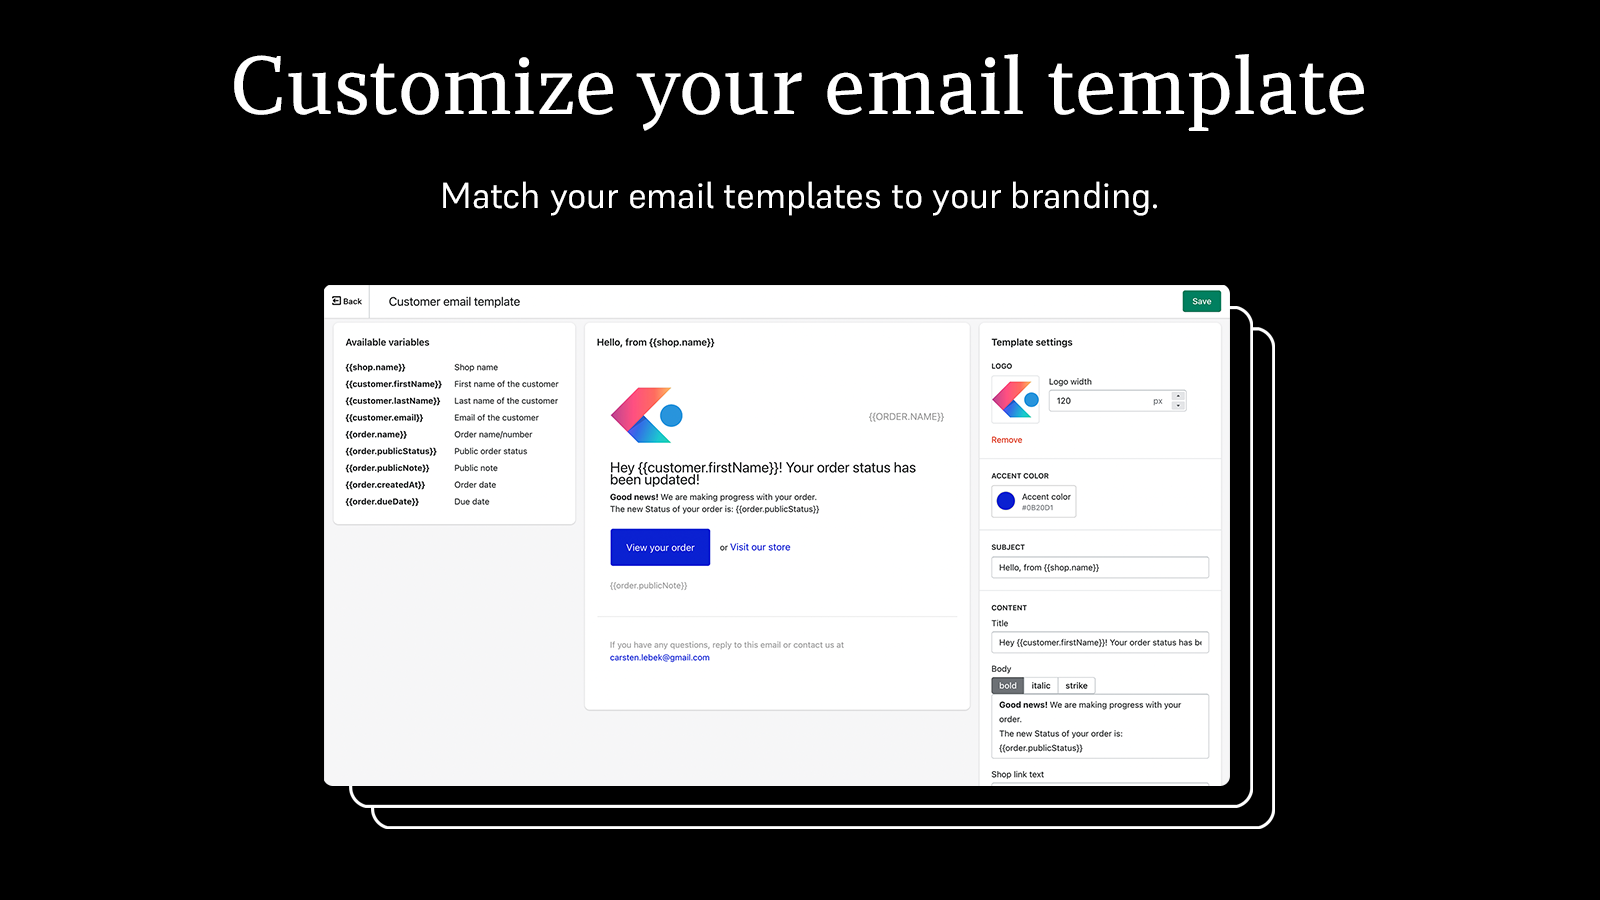 Match your email templates to your branding